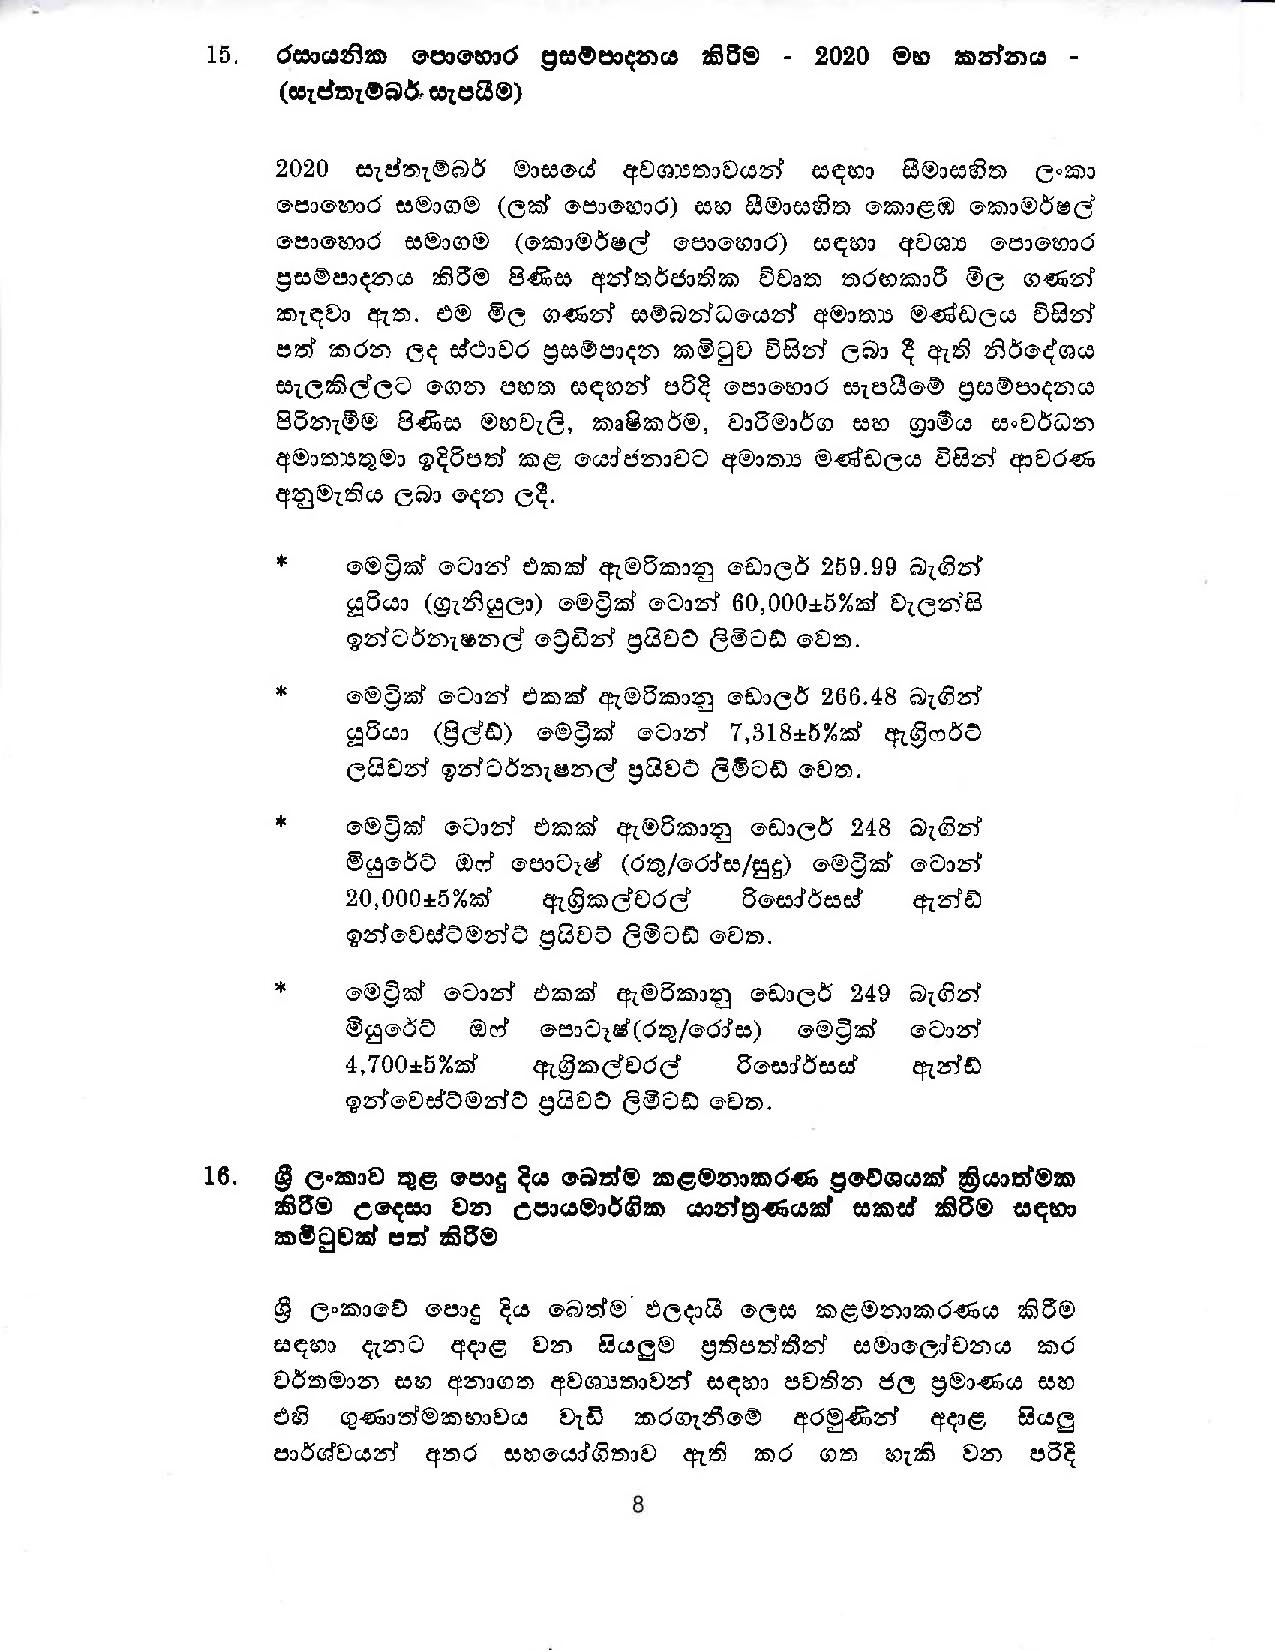 Cabinet Decision on 22.07.2020 page 008